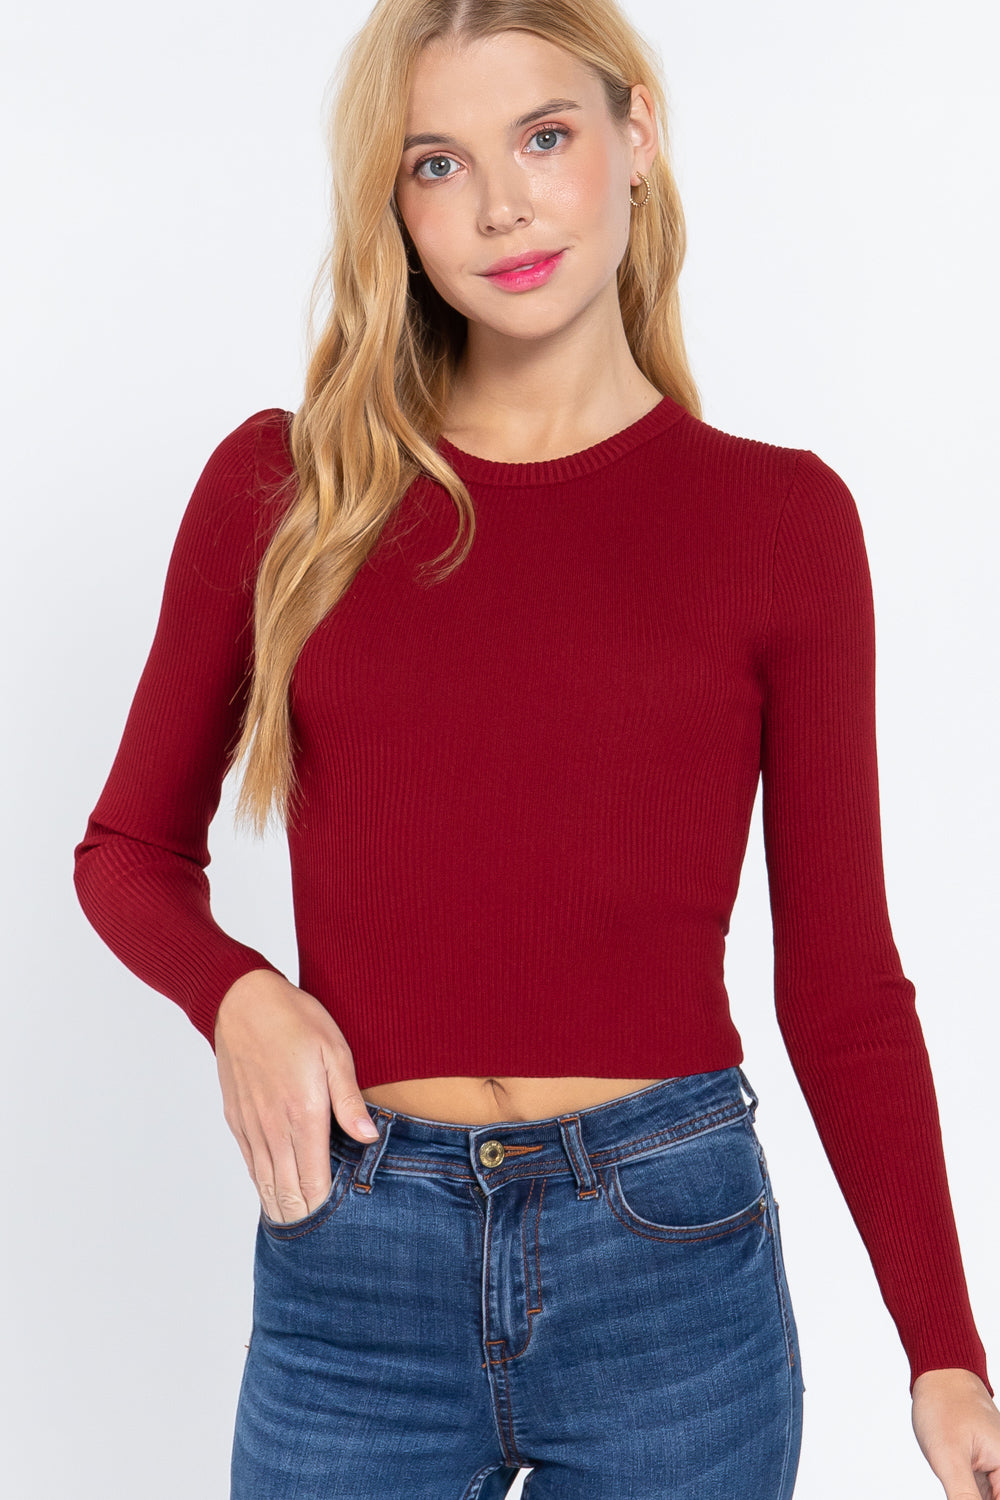 Long Slv Open Back Sweater Top Sunny EvE Fashion